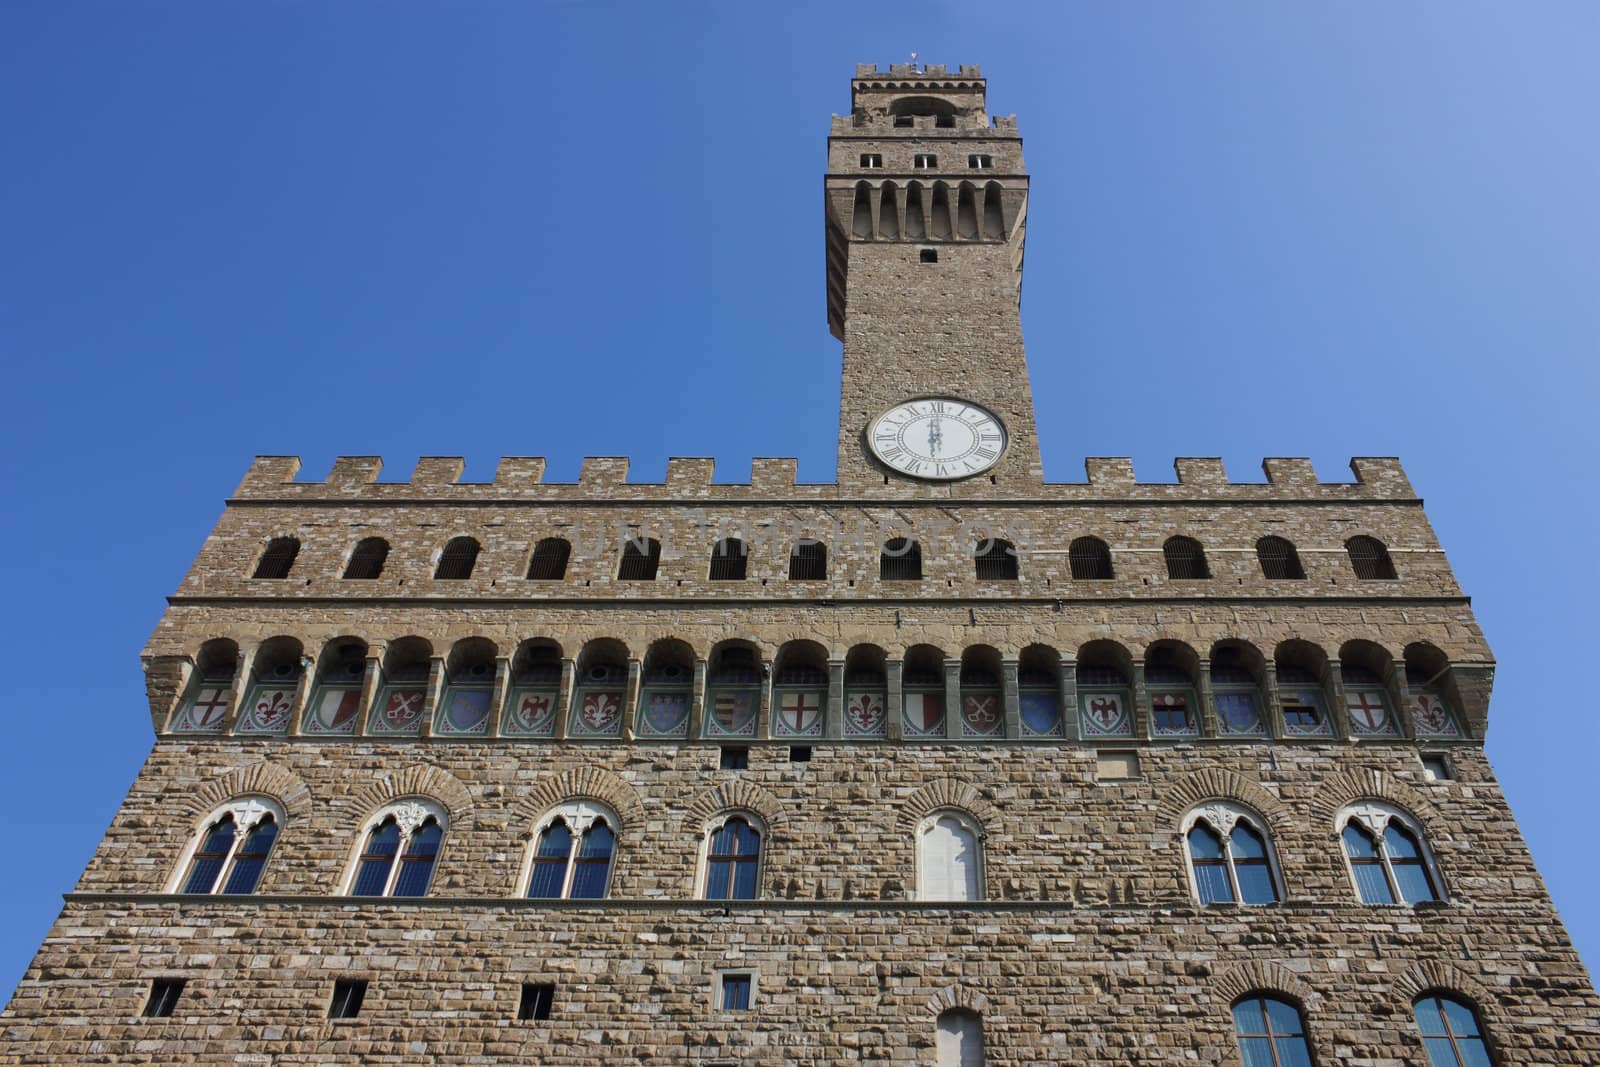 Palazzo Vecchio facade in Florence on clear blue sky background.